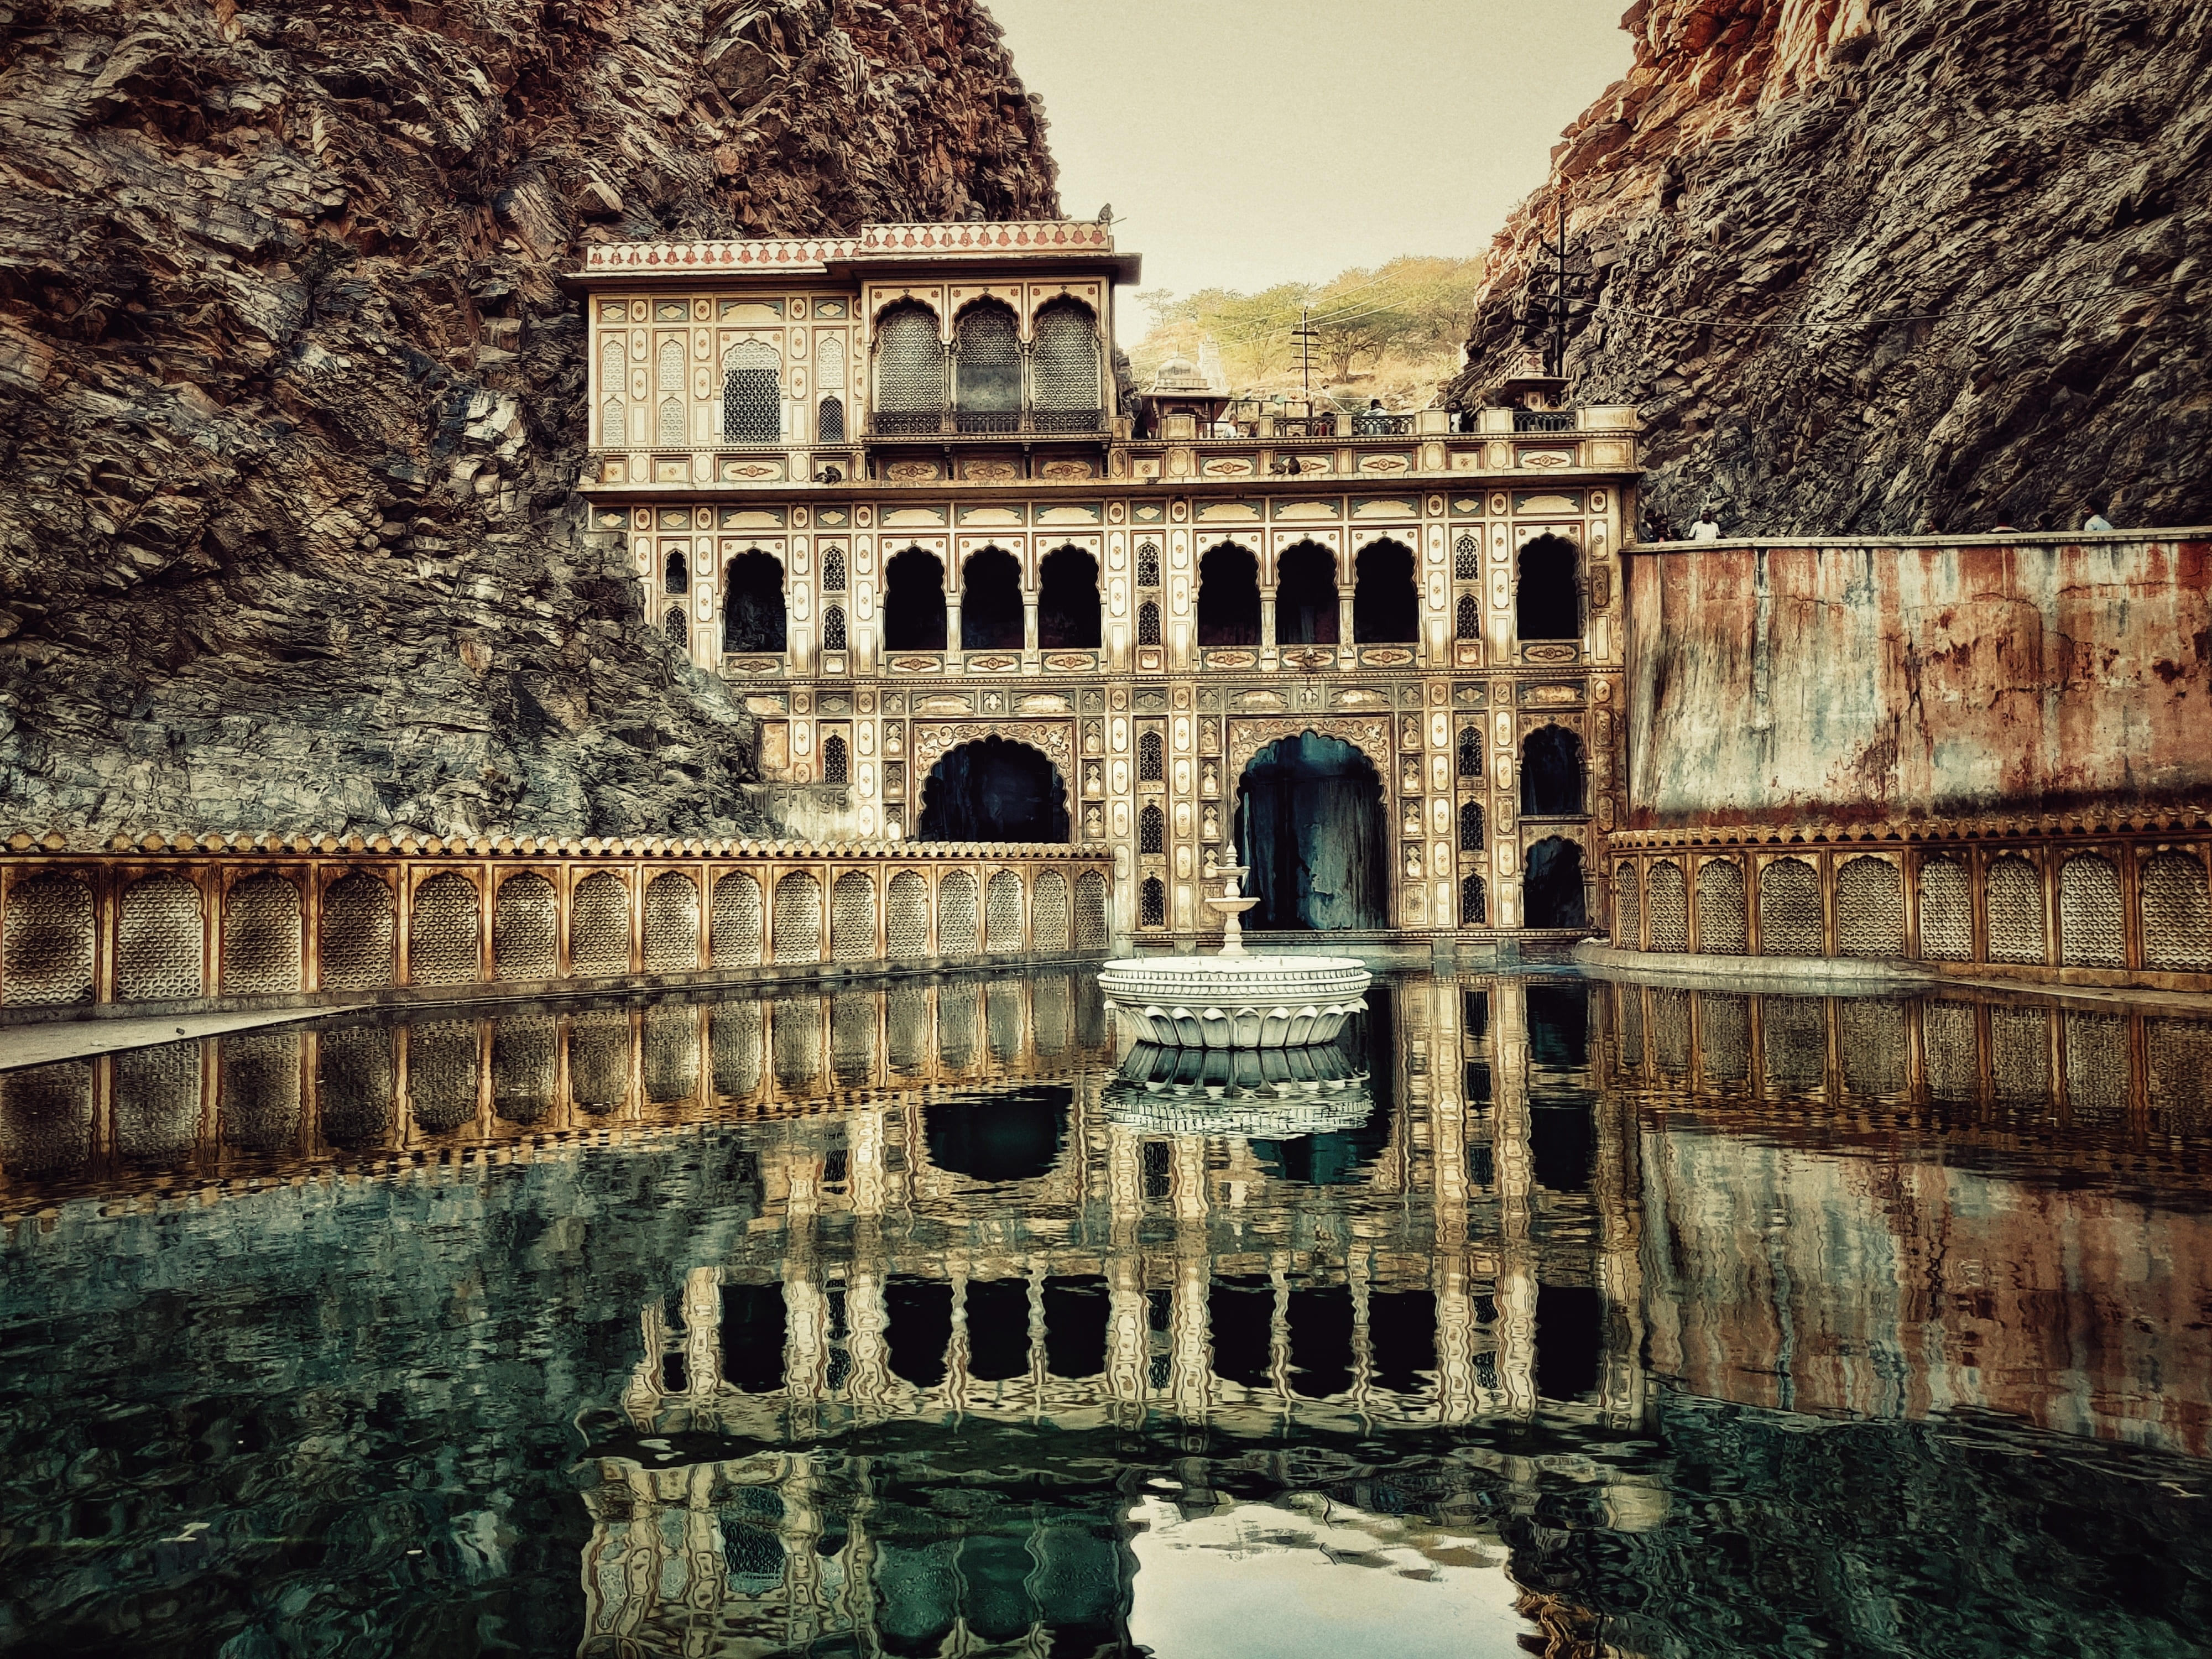 Rajasthan Packages from Hyderabad | Get Upto 50% Off